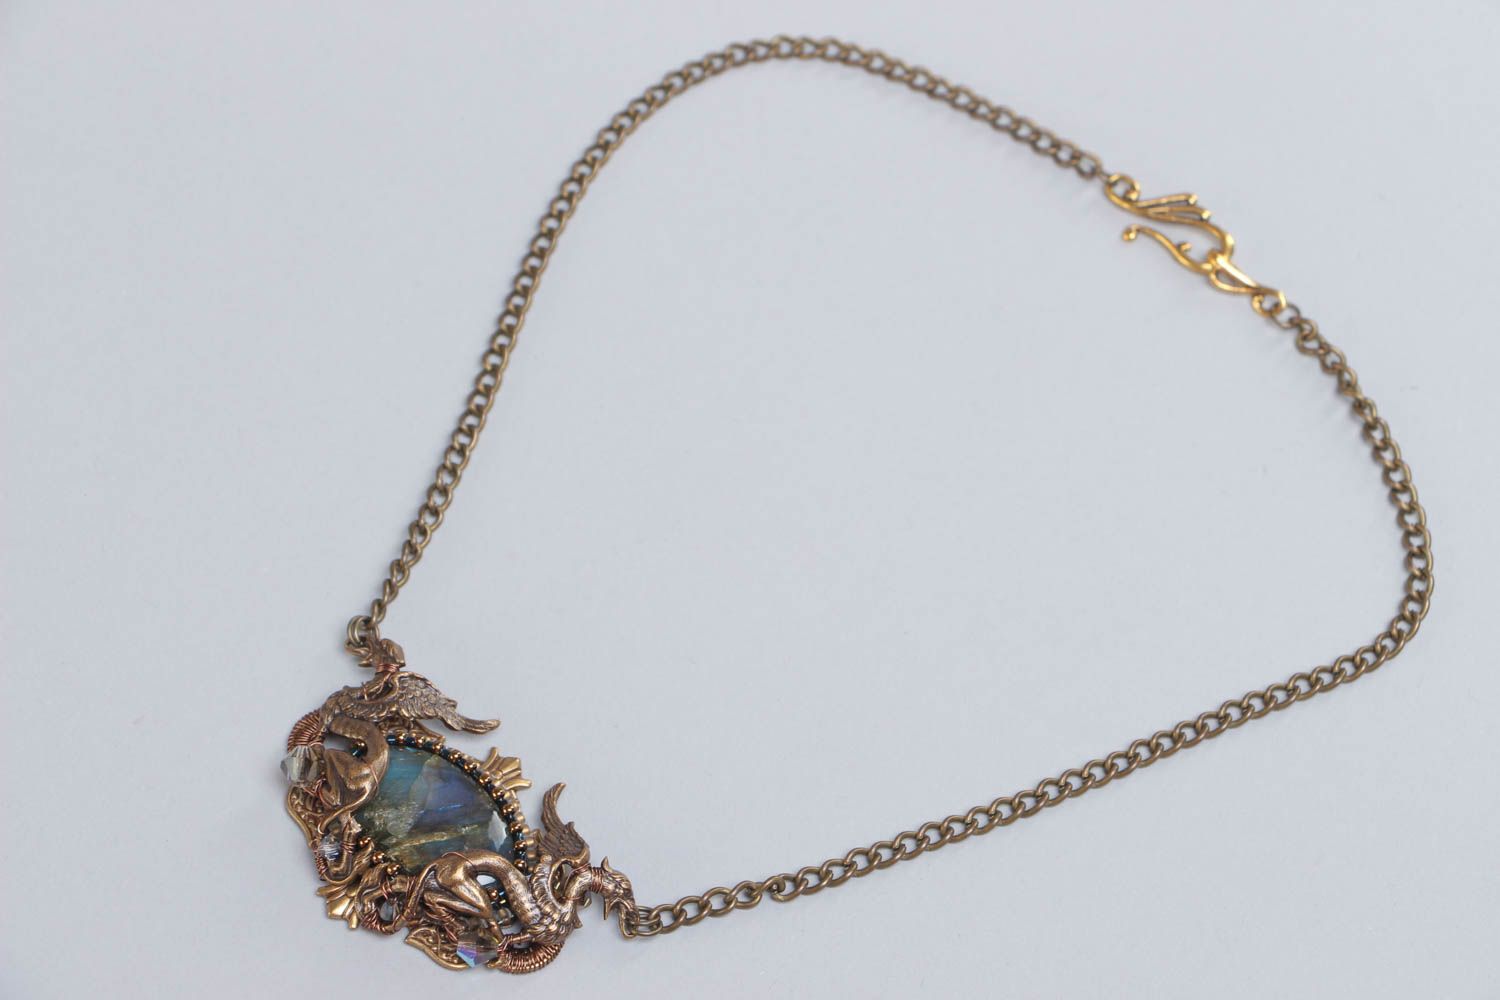 Handmade metal pendant necklace with labradorite stone on chain in elven style photo 2